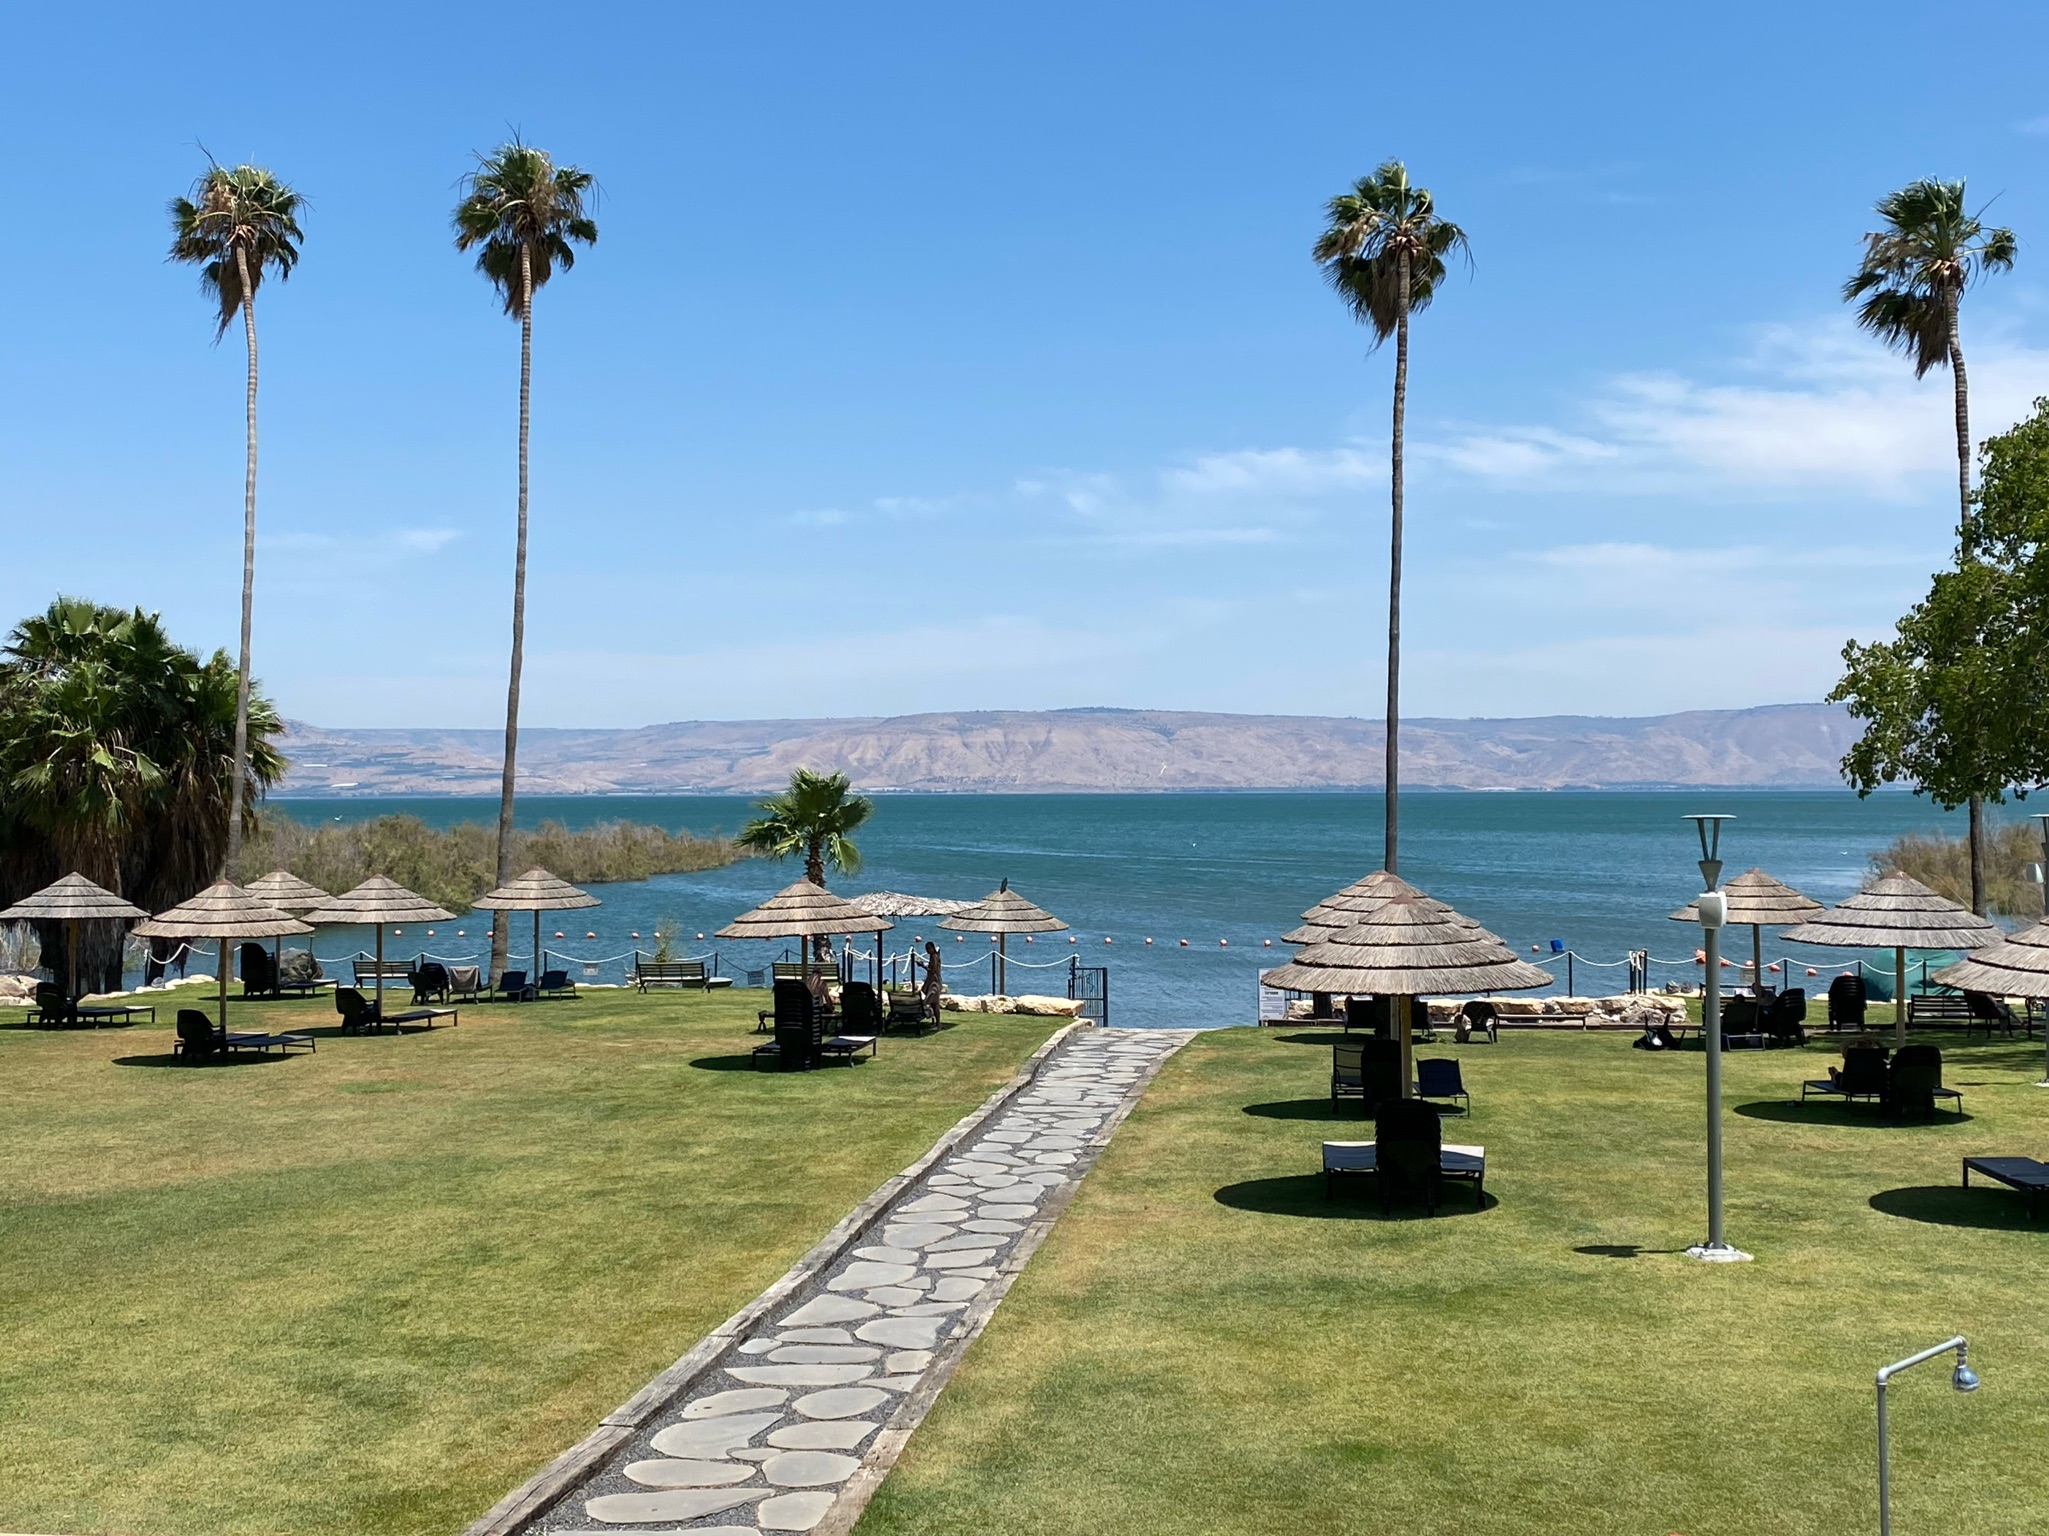 The Sea of Galilee is as beautiful as ever